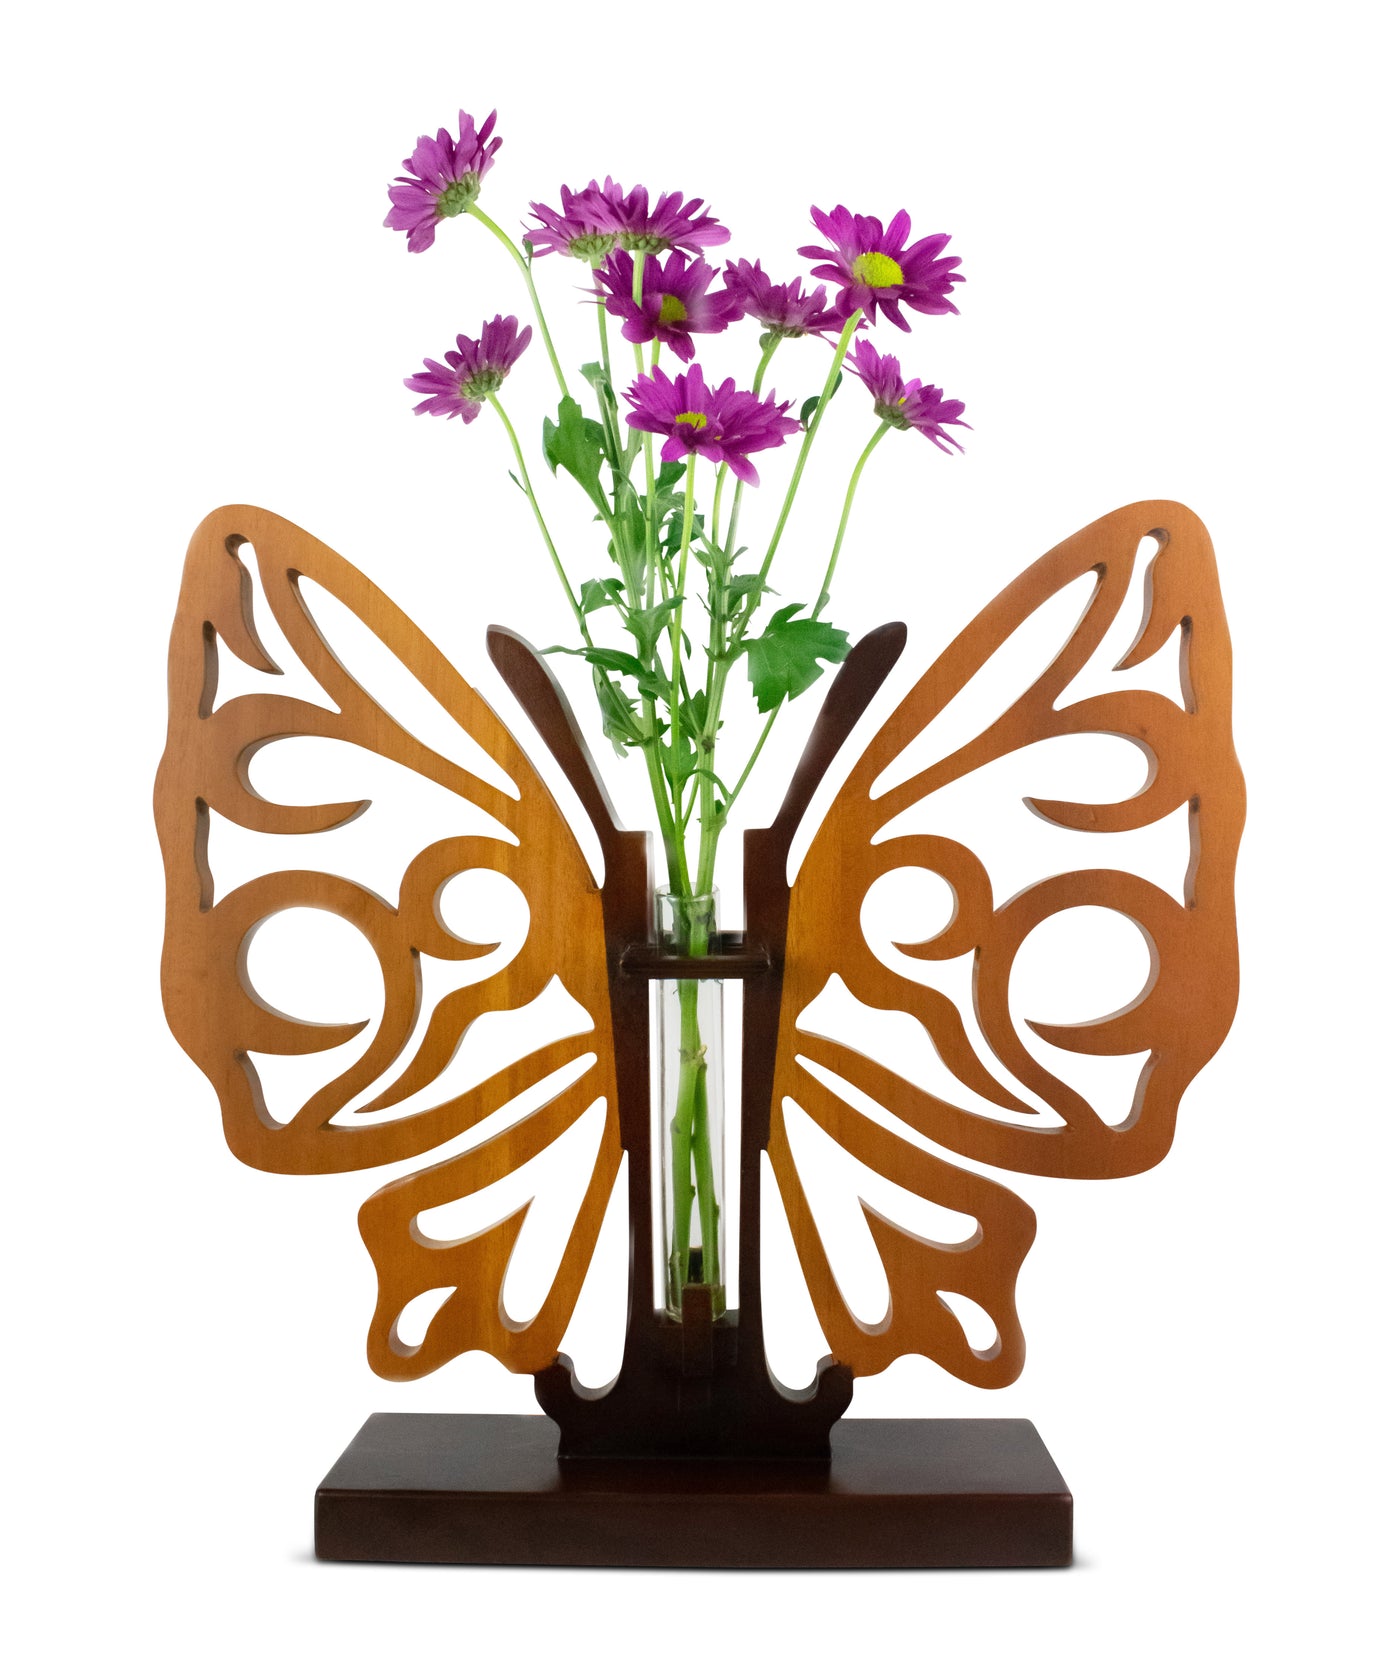 Handmade Wooden Butterfly Vase Decor Hand Carved Decorative Accent Handcrafted Art Home Decoration Gift Butterfly